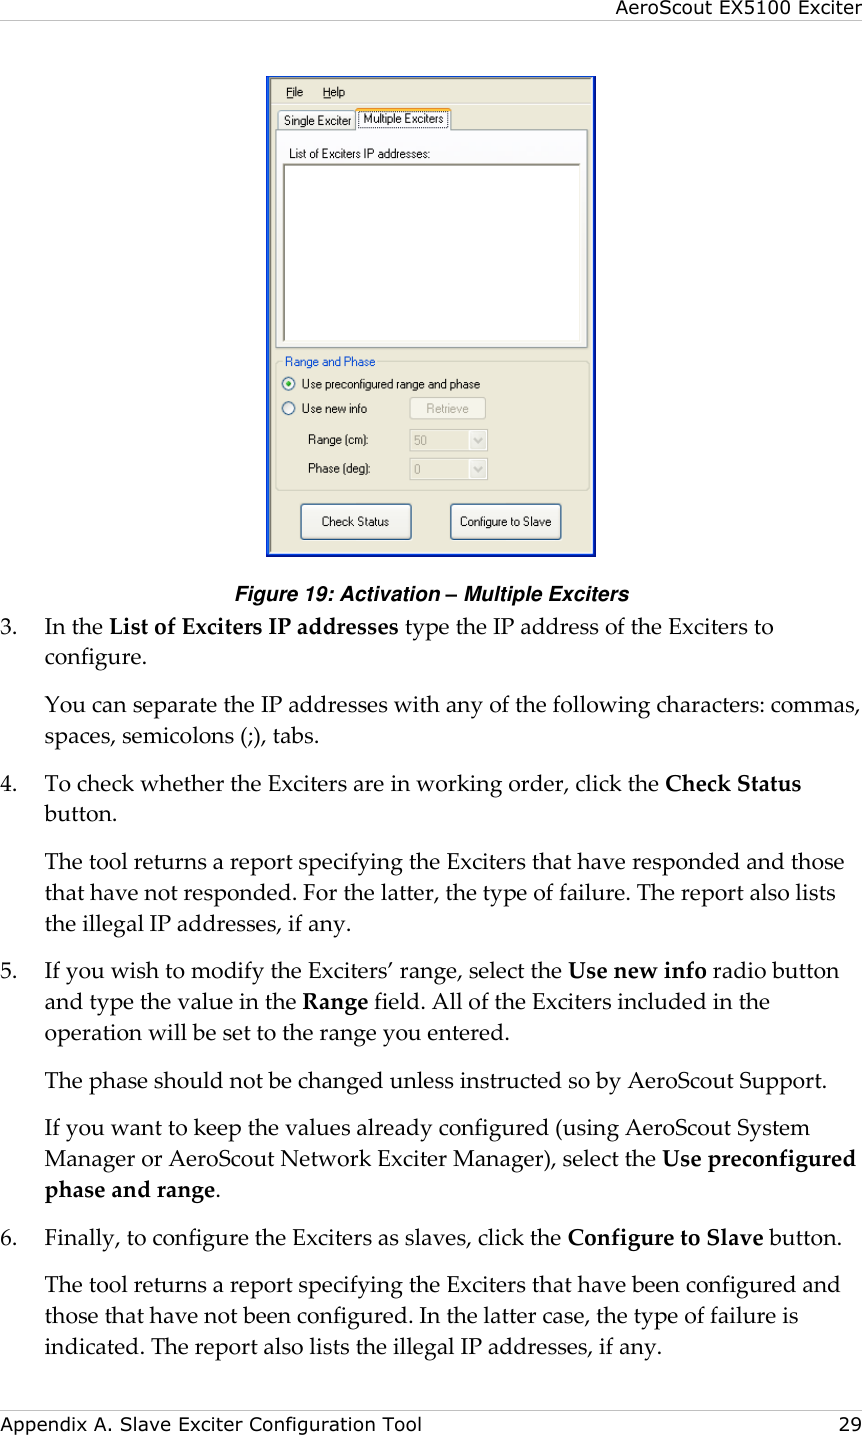 AeroScout EX5100 Exciter  Appendix A. Slave Exciter Configuration Tool    29  Figure 19: Activation – Multiple Exciters 3.  In the List of Exciters IP addresses type the IP address of the Exciters to configure. You can separate the IP addresses with any of the following characters: commas, spaces, semicolons (;), tabs. 4.  To check whether the Exciters are in working order, click the Check Status button.   The tool returns a report specifying the Exciters that have responded and those that have not responded. For the latter, the type of failure. The report also lists the illegal IP addresses, if any. 5.  If you wish to modify the Exciters’ range, select the Use new info radio button and type the value in the Range field. All of the Exciters included in the operation will be set to the range you entered.   The phase should not be changed unless instructed so by AeroScout Support.   If you want to keep the values already configured (using AeroScout System Manager or AeroScout Network Exciter Manager), select the Use preconfigured phase and range. 6.  Finally, to configure the Exciters as slaves, click the Configure to Slave button.   The tool returns a report specifying the Exciters that have been configured and those that have not been configured. In the latter case, the type of failure is indicated. The report also lists the illegal IP addresses, if any.   